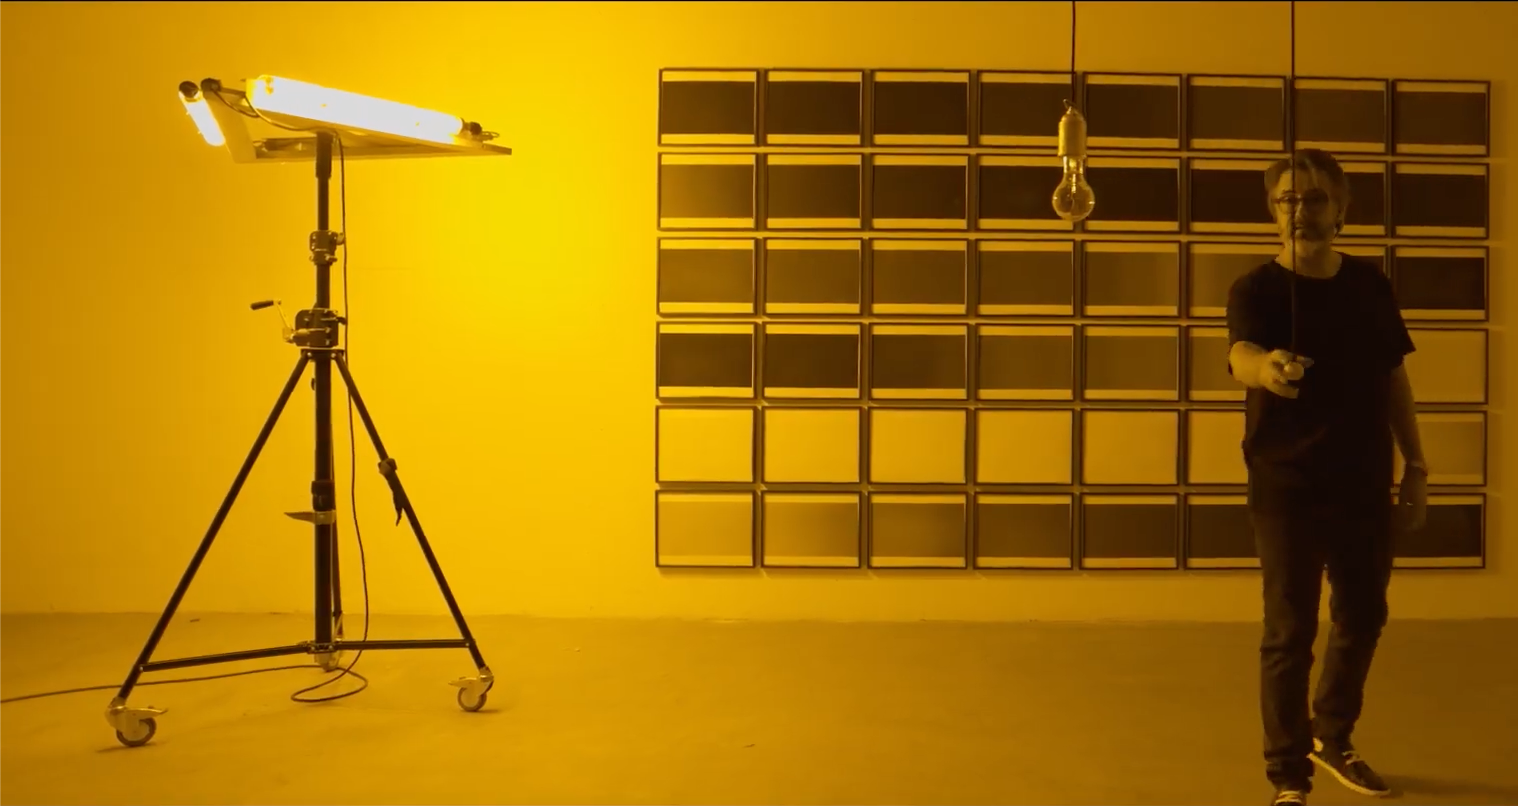 Olafur Eliasson turning on a lightbulb in a room lit with yellow light.